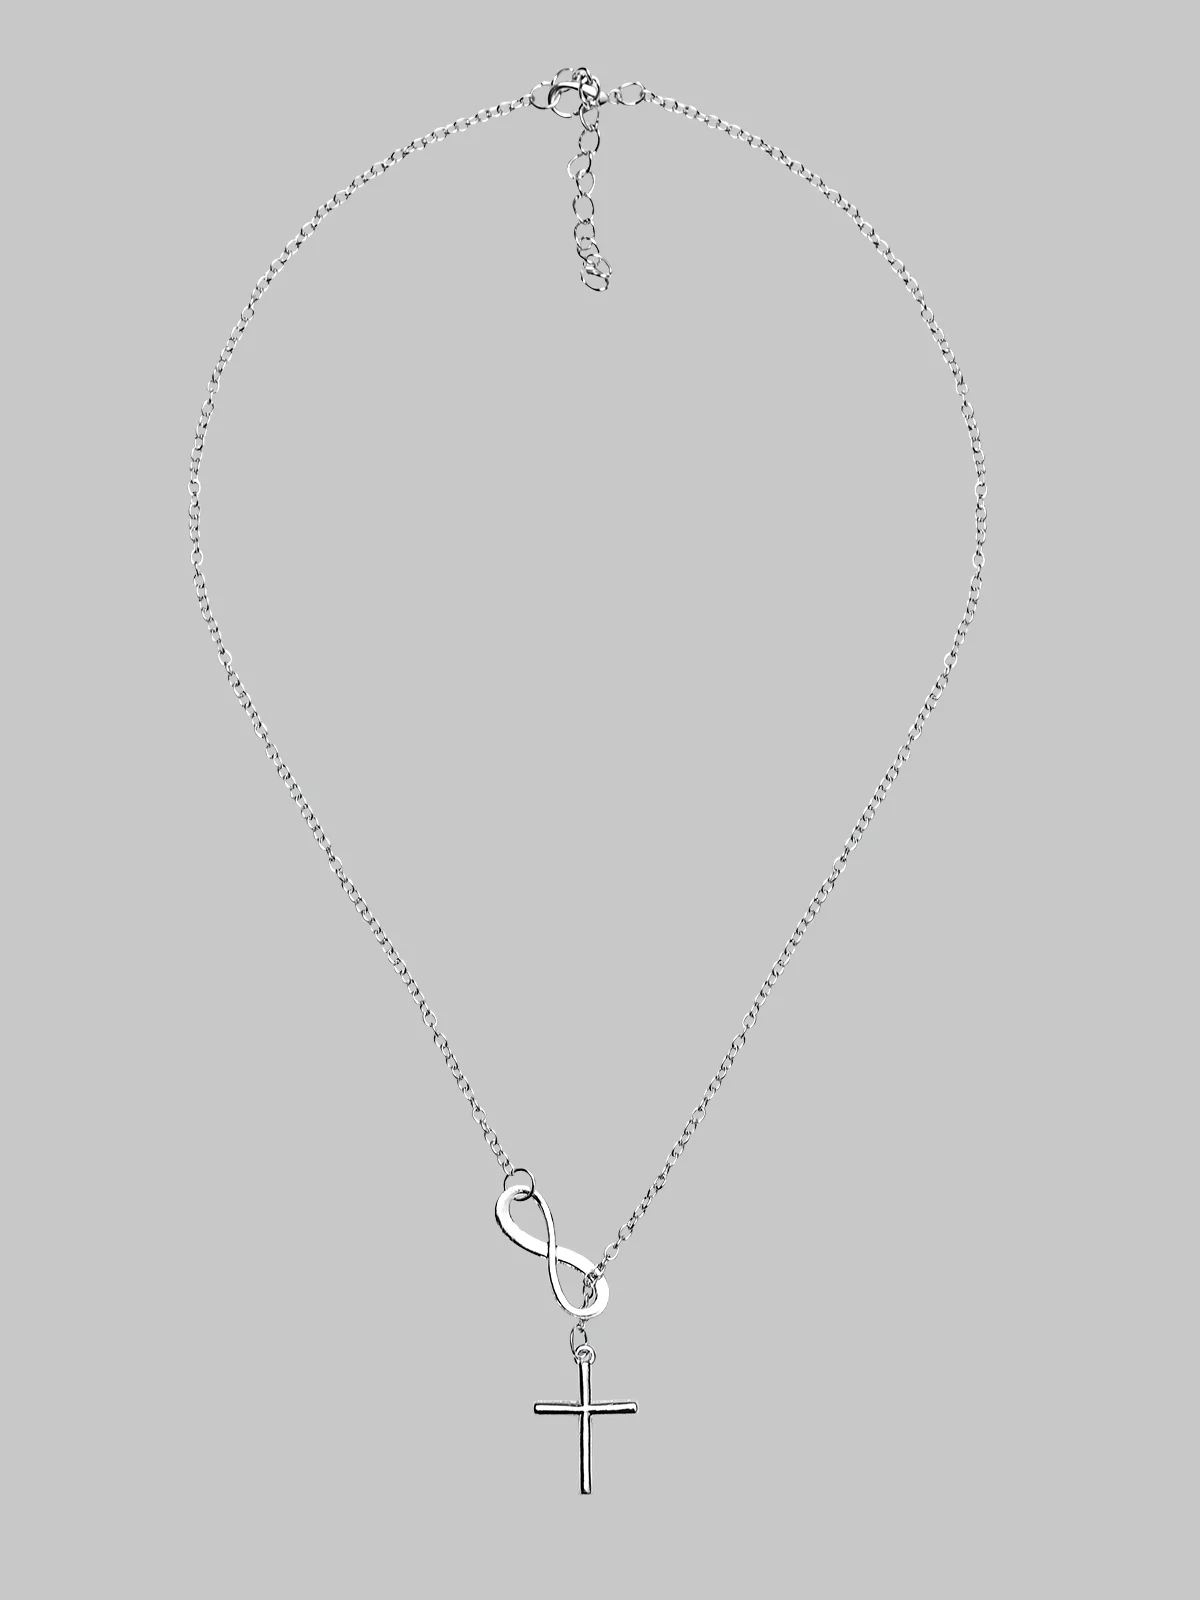 Silver Bowknot Necklace